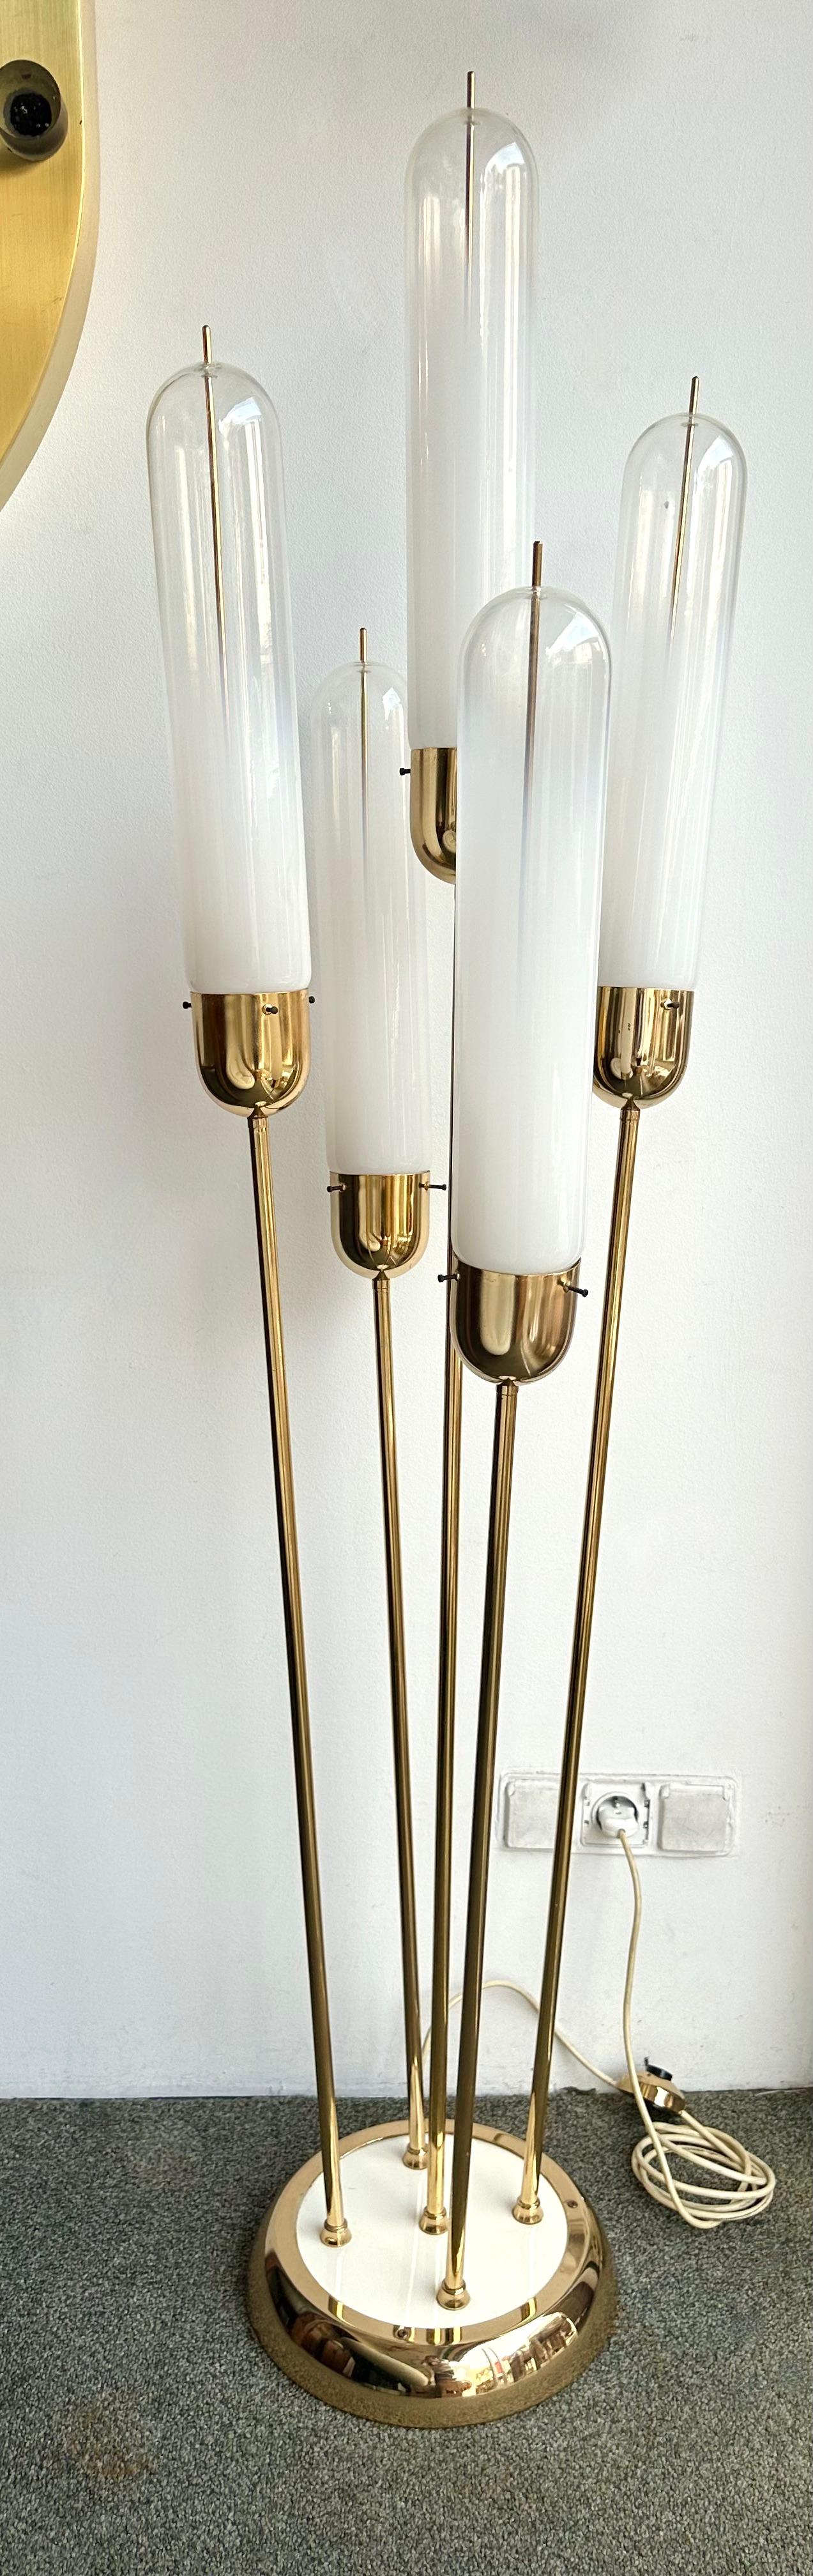 Mid-Century Modern Brass Reed Floor Lamp Murano Glass by Mazzega, Italy, 1970s For Sale 8